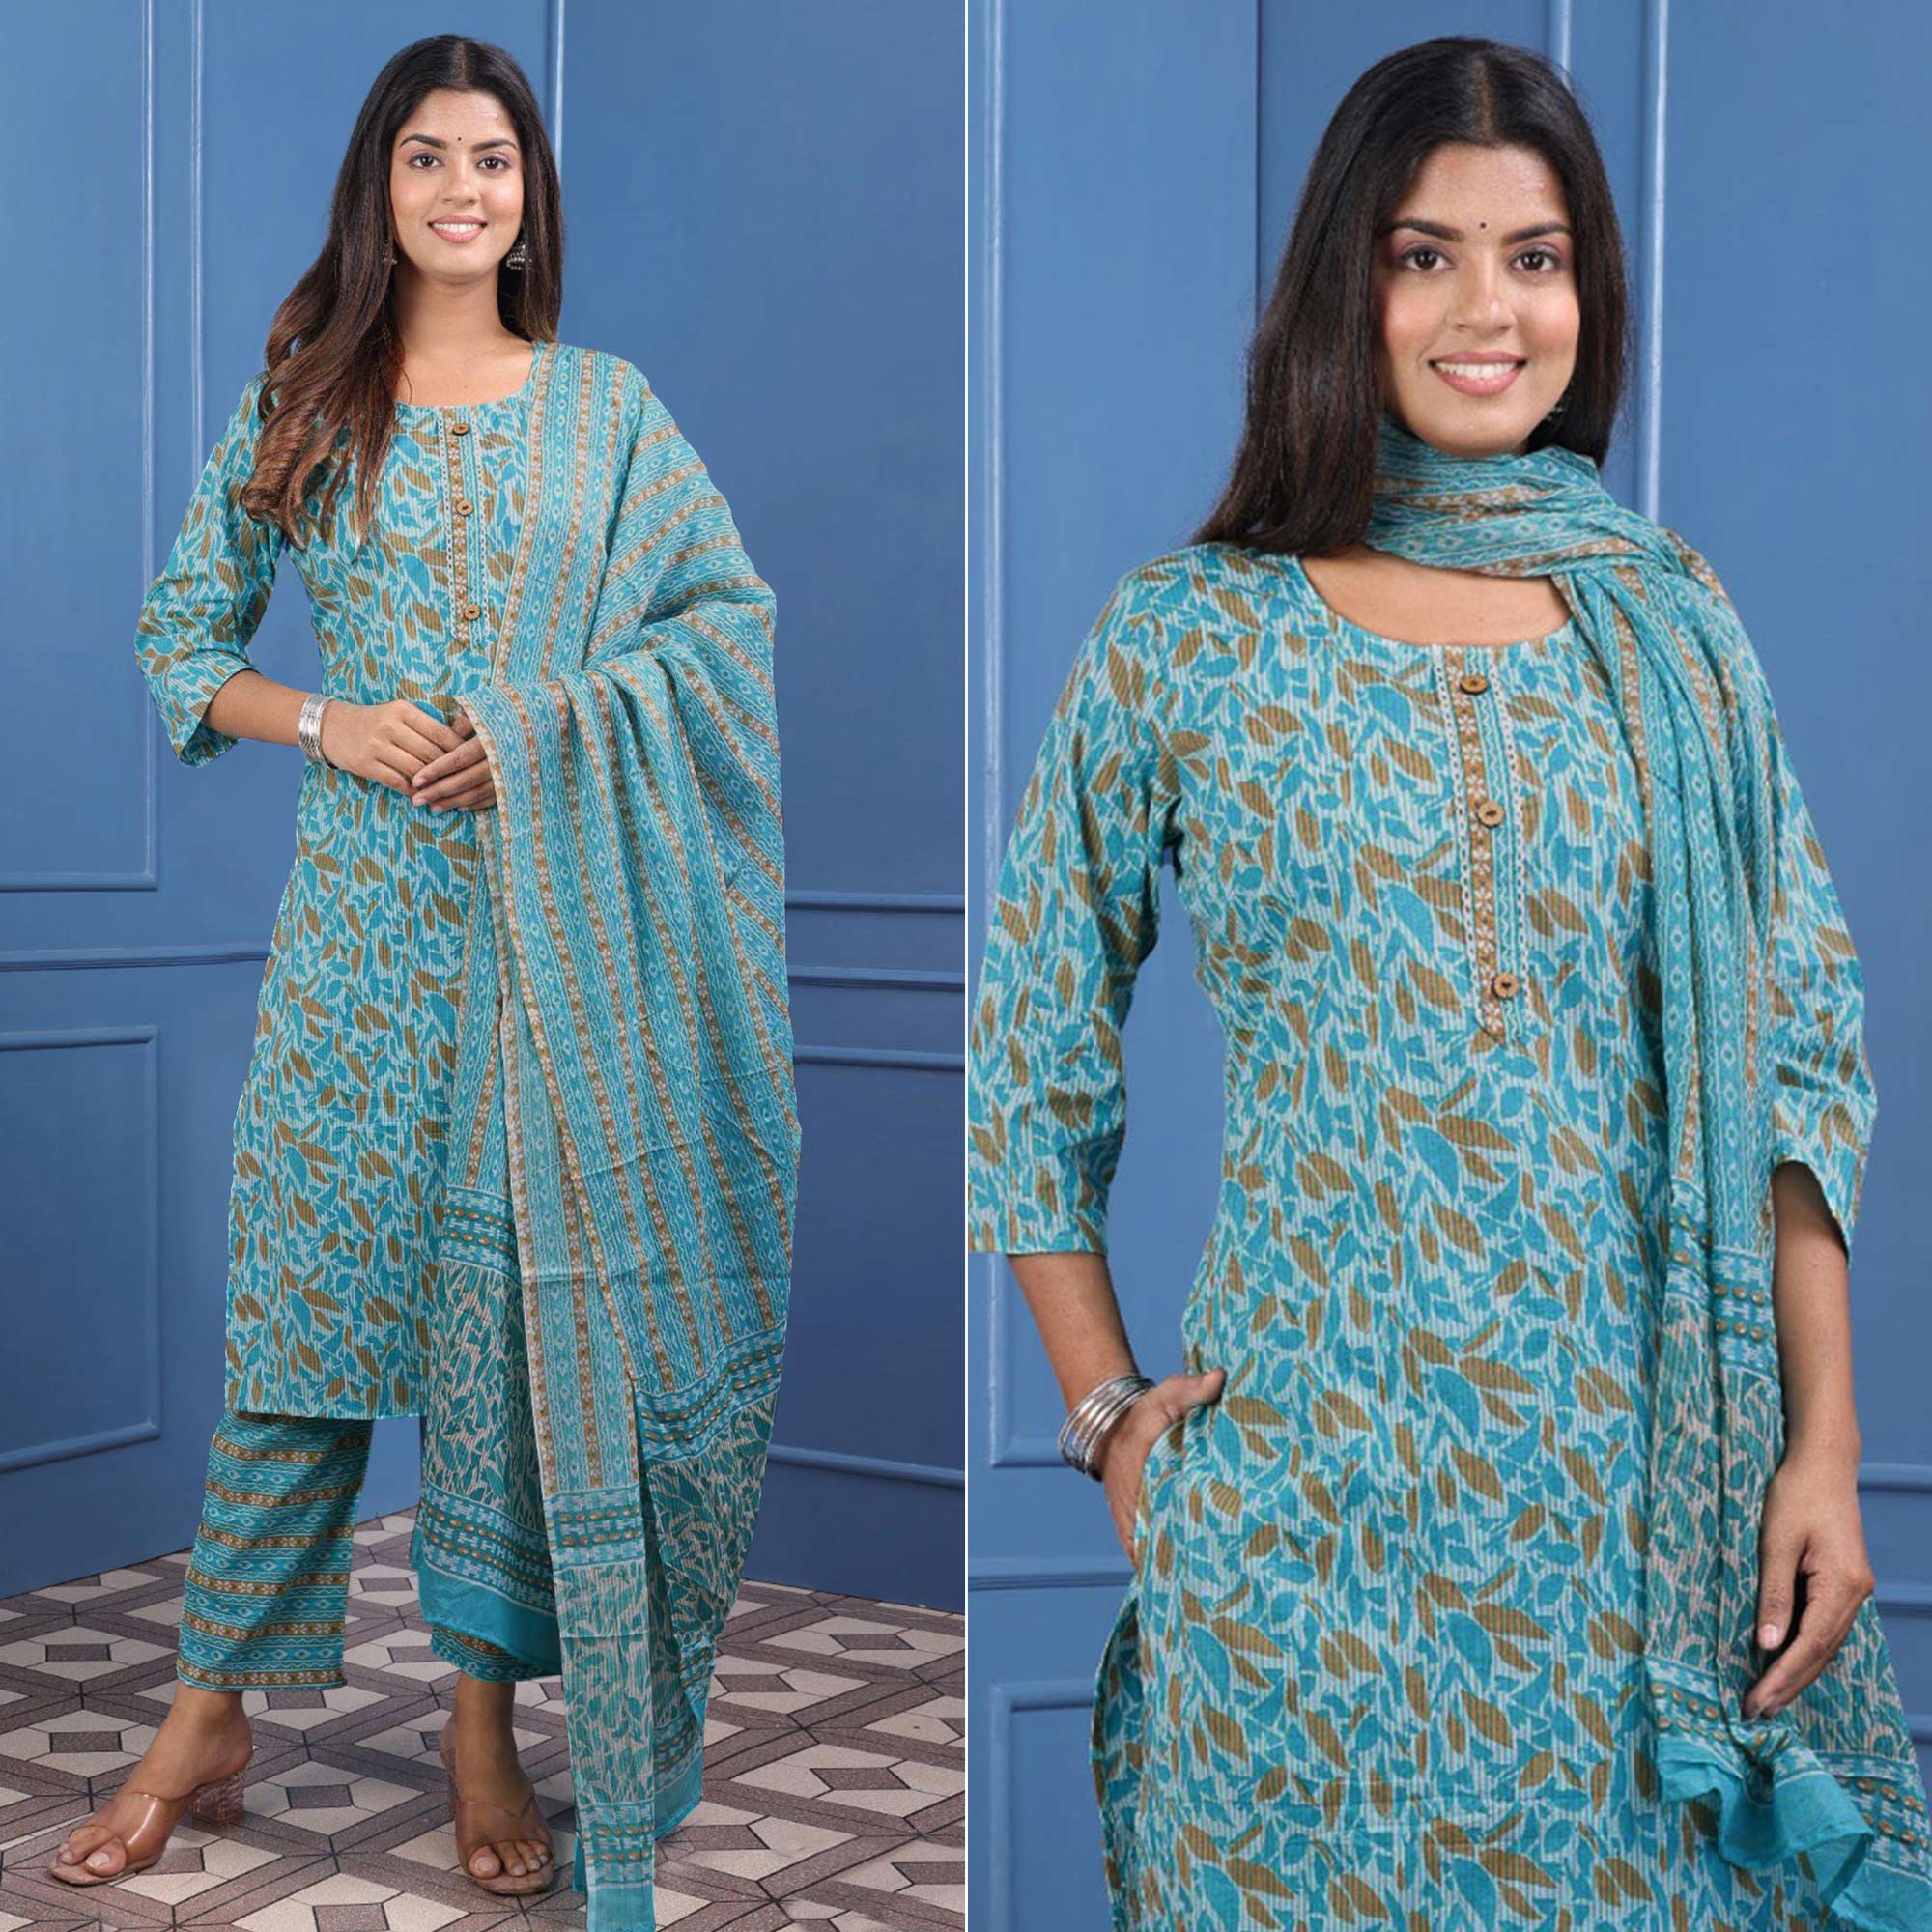 Turquoise Floral Printed Pure Cotton Suit